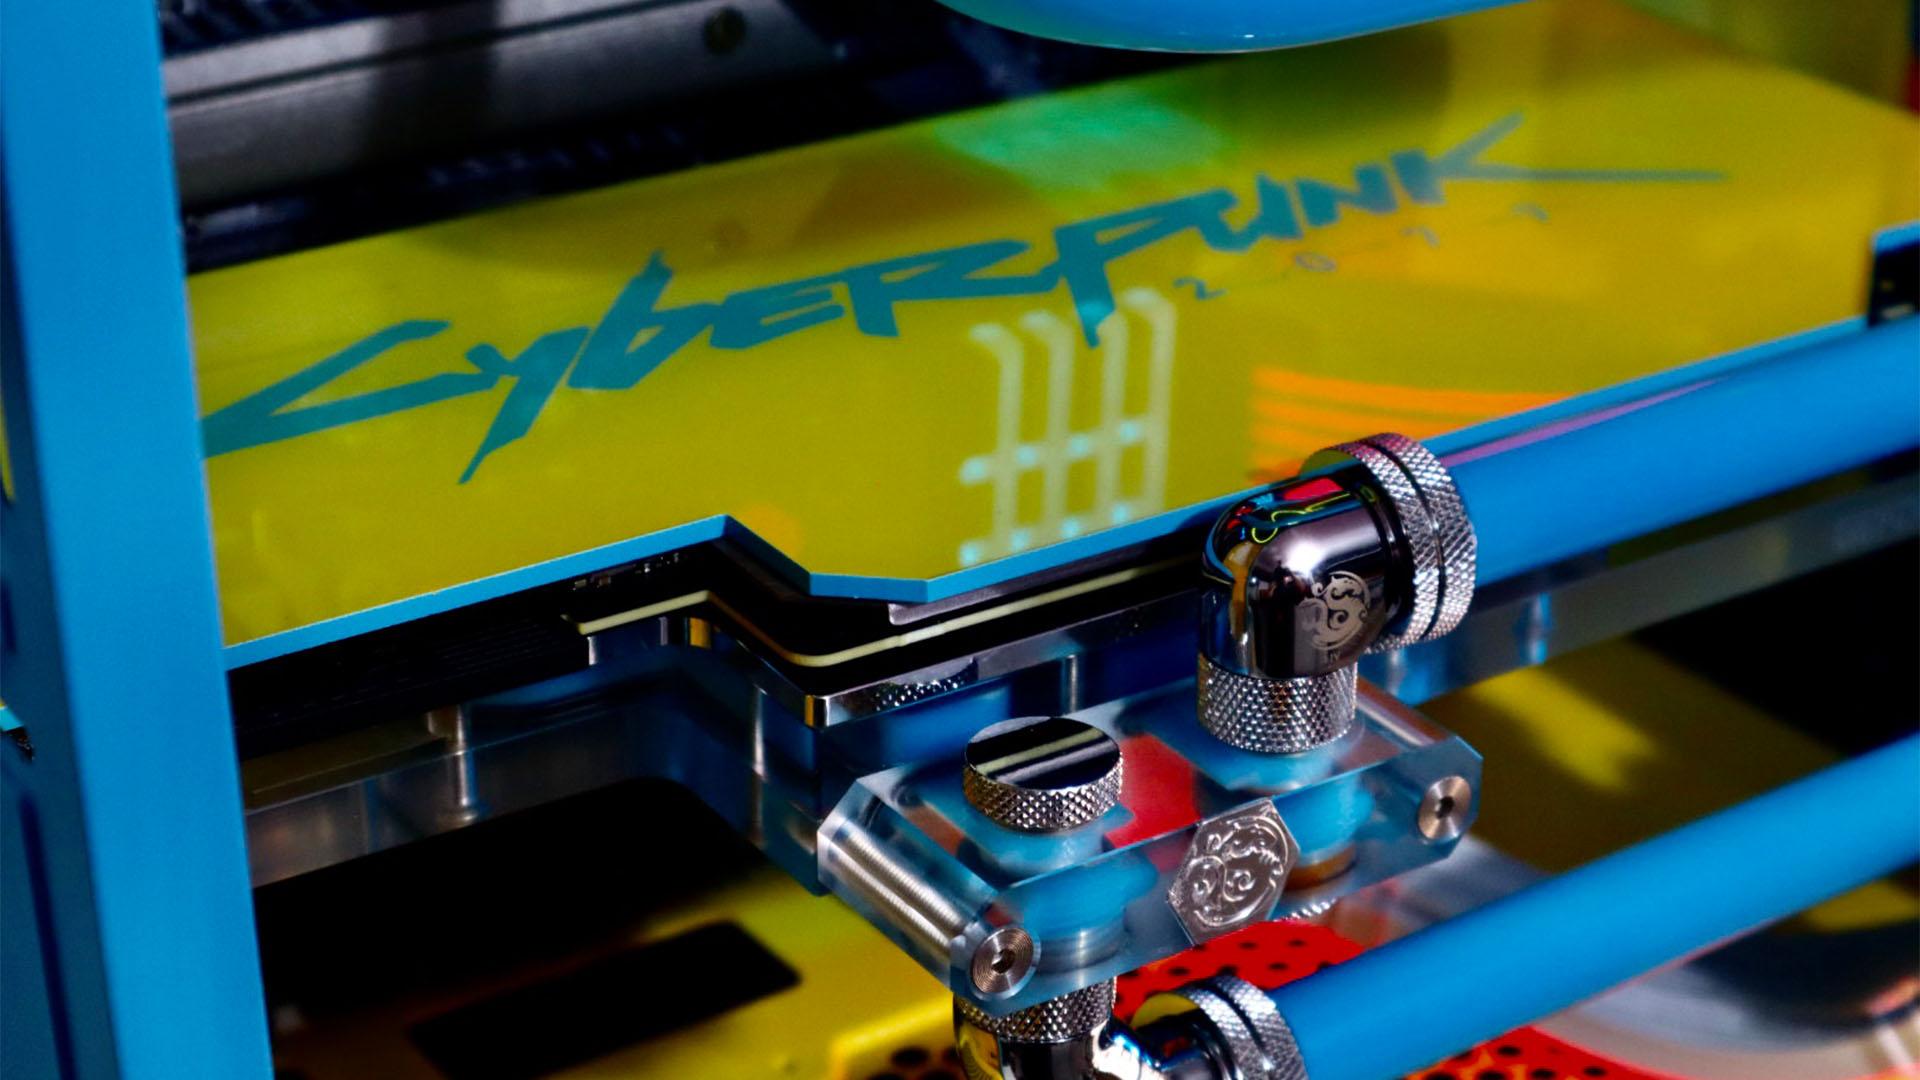 The Cyberpunk 2077 gaming PC with a custom yellow and blue GPU backplate